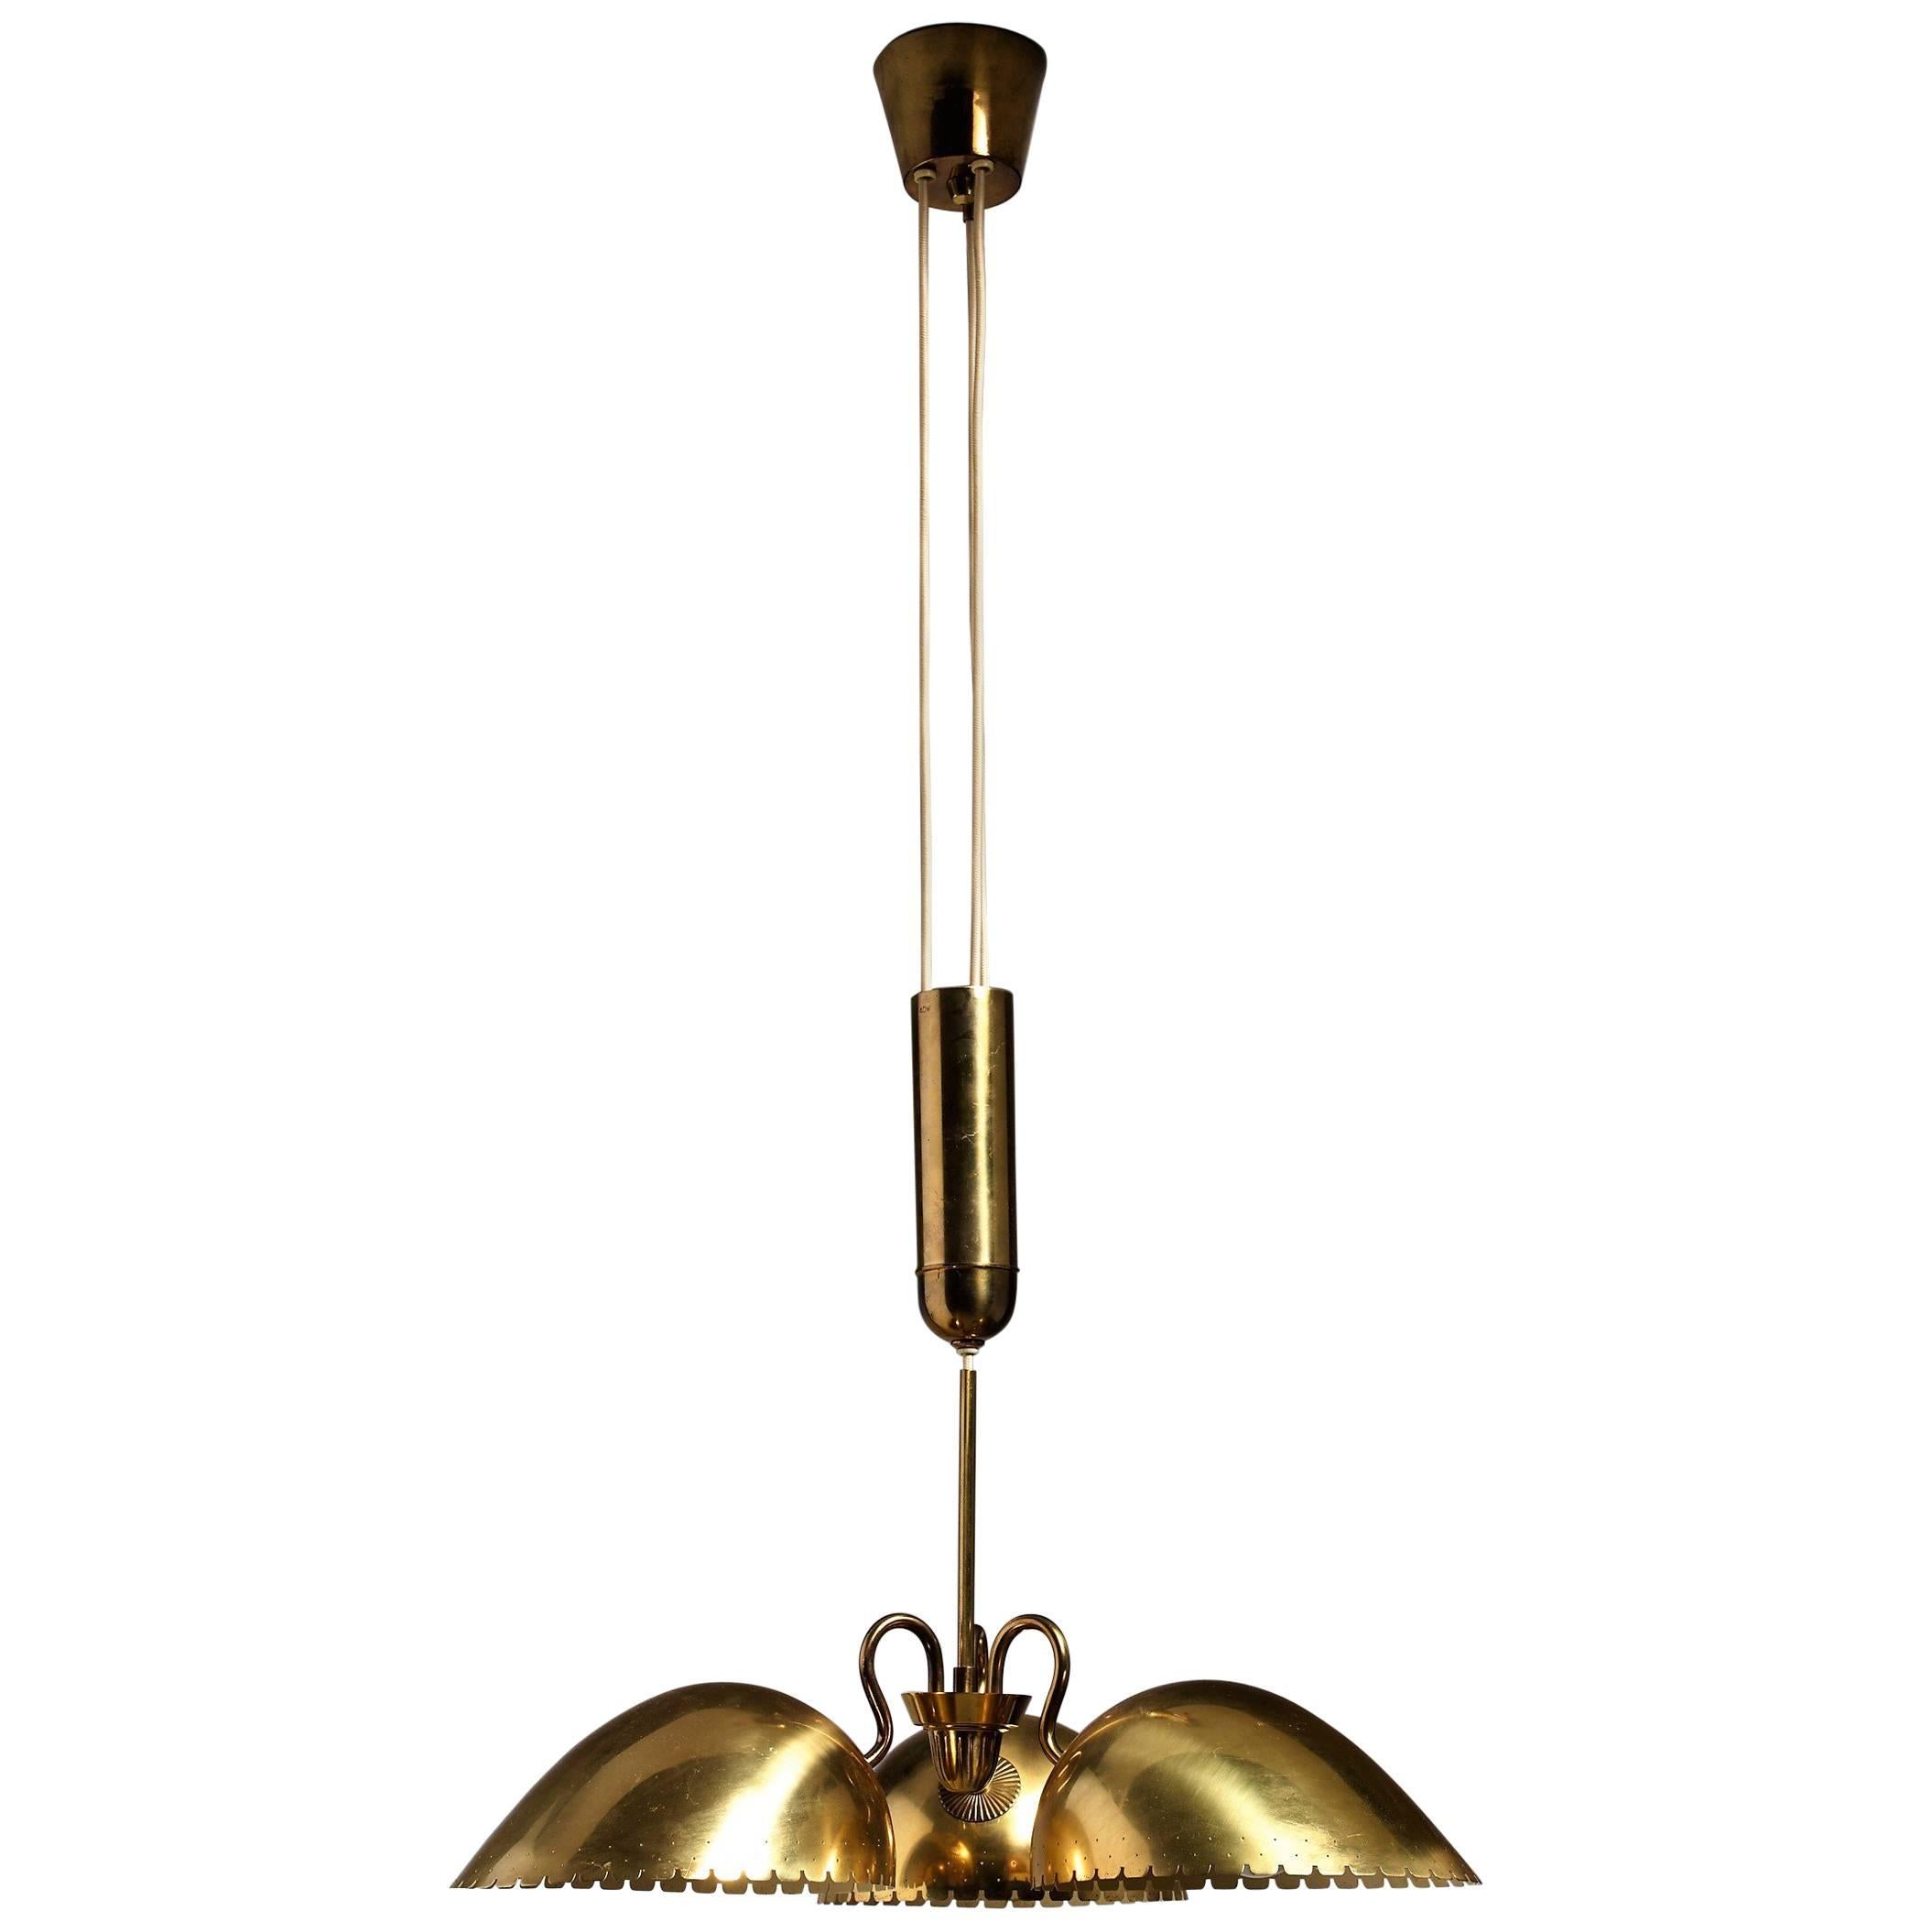 Bertil Brisborg Brass Pendant with Three Shades, Bohlmarks, Sweden, 1940s For Sale